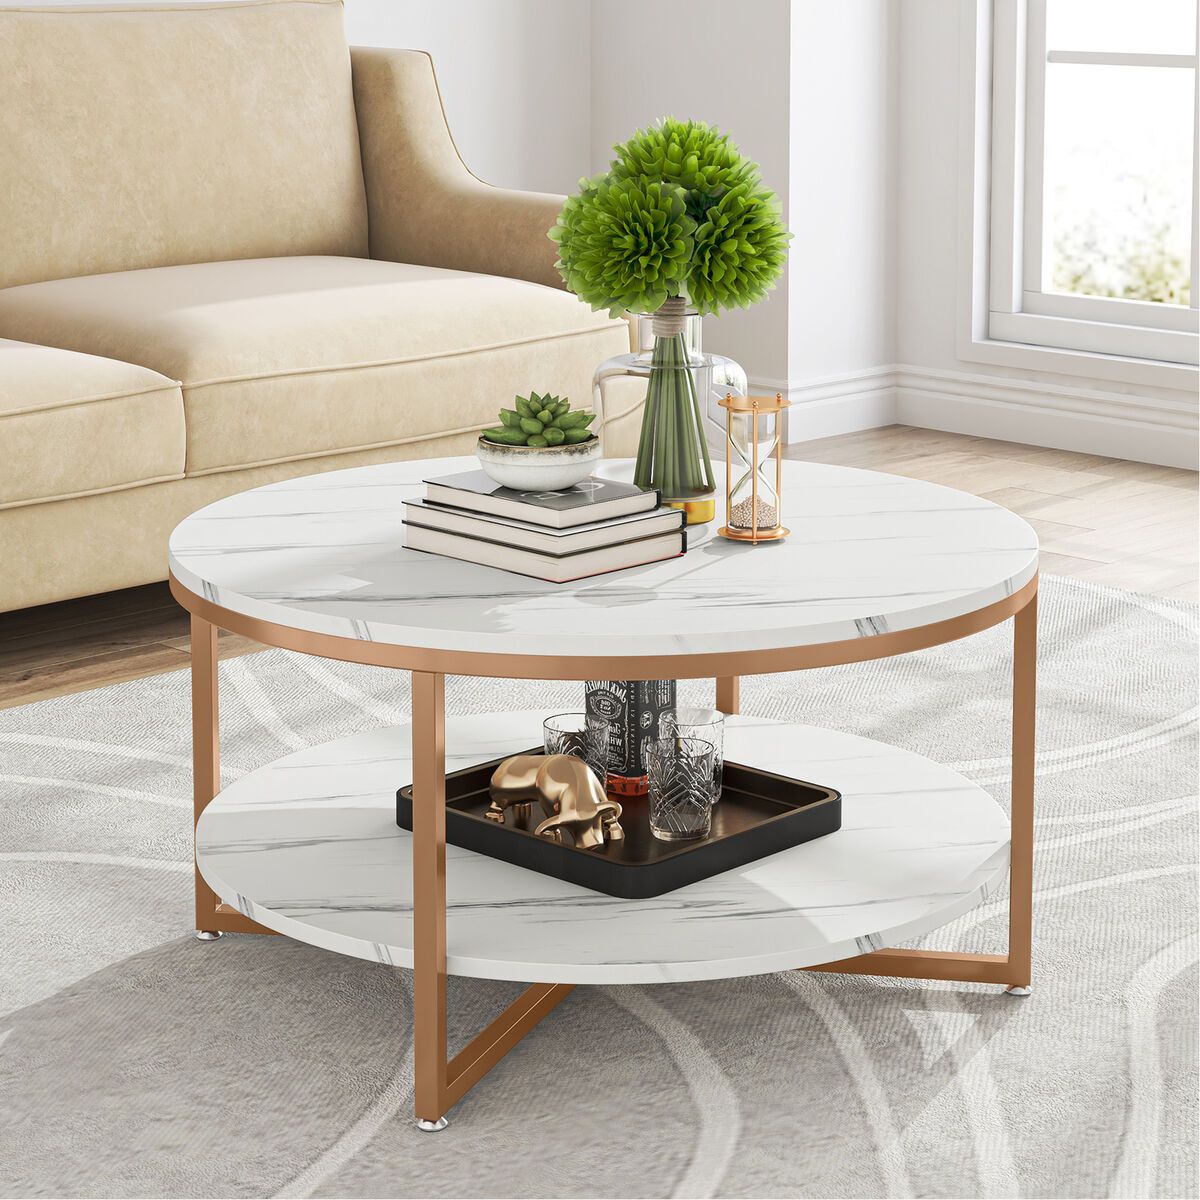 2 Tier Round Coffee Table With Storage, Modern Faux Marble Wood Coffee Table  | Ebay In Modern Round Faux Marble Coffee Tables (Photo 1 of 15)